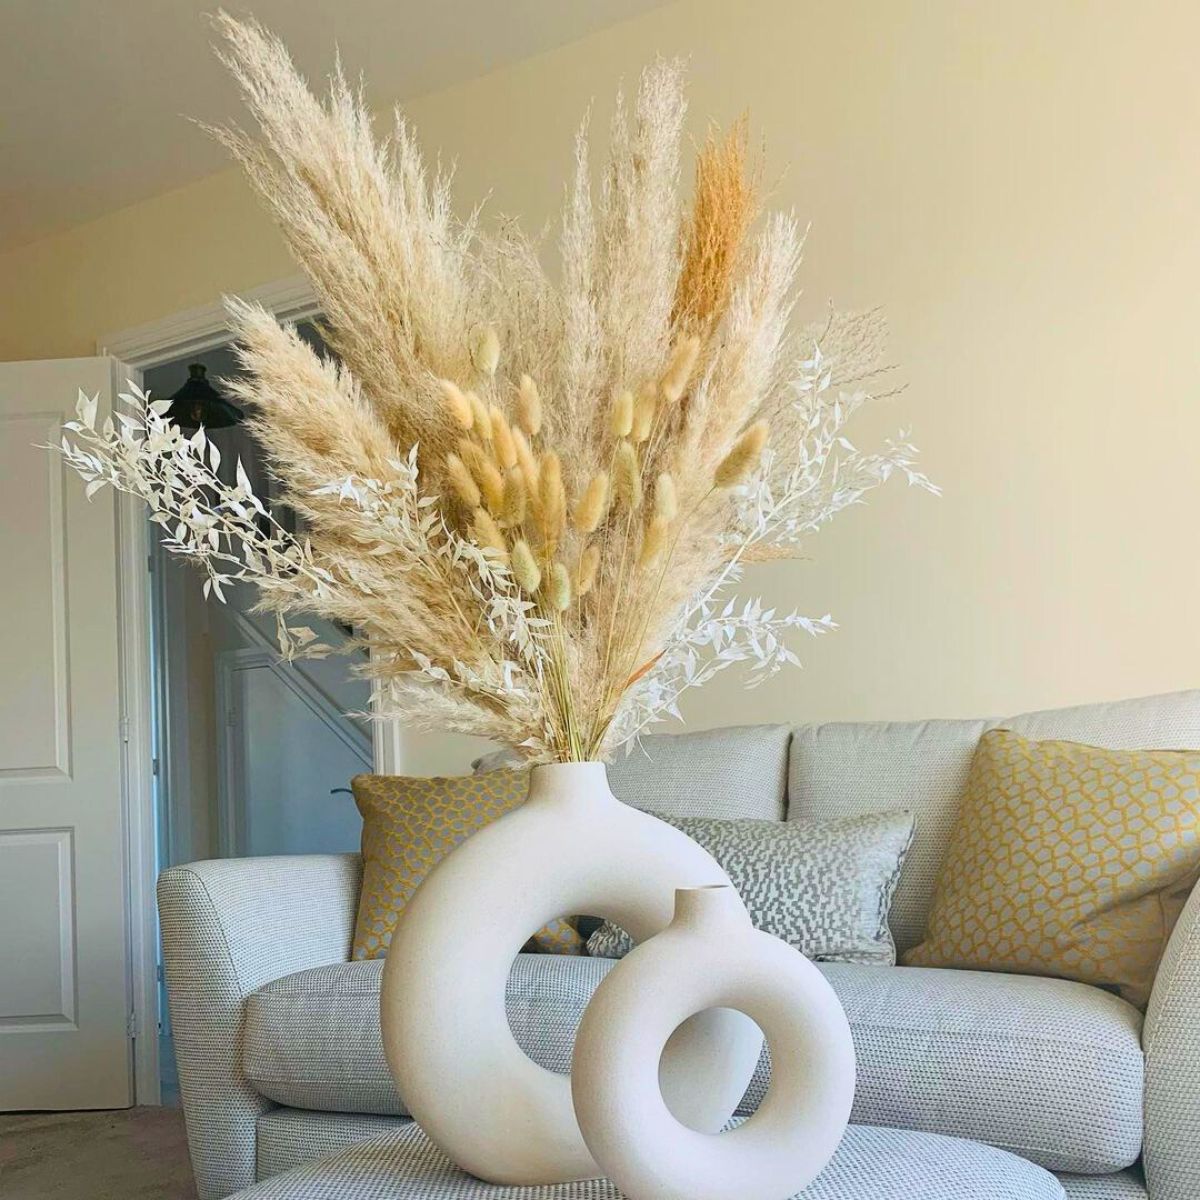 Pampas grass for decor in any room